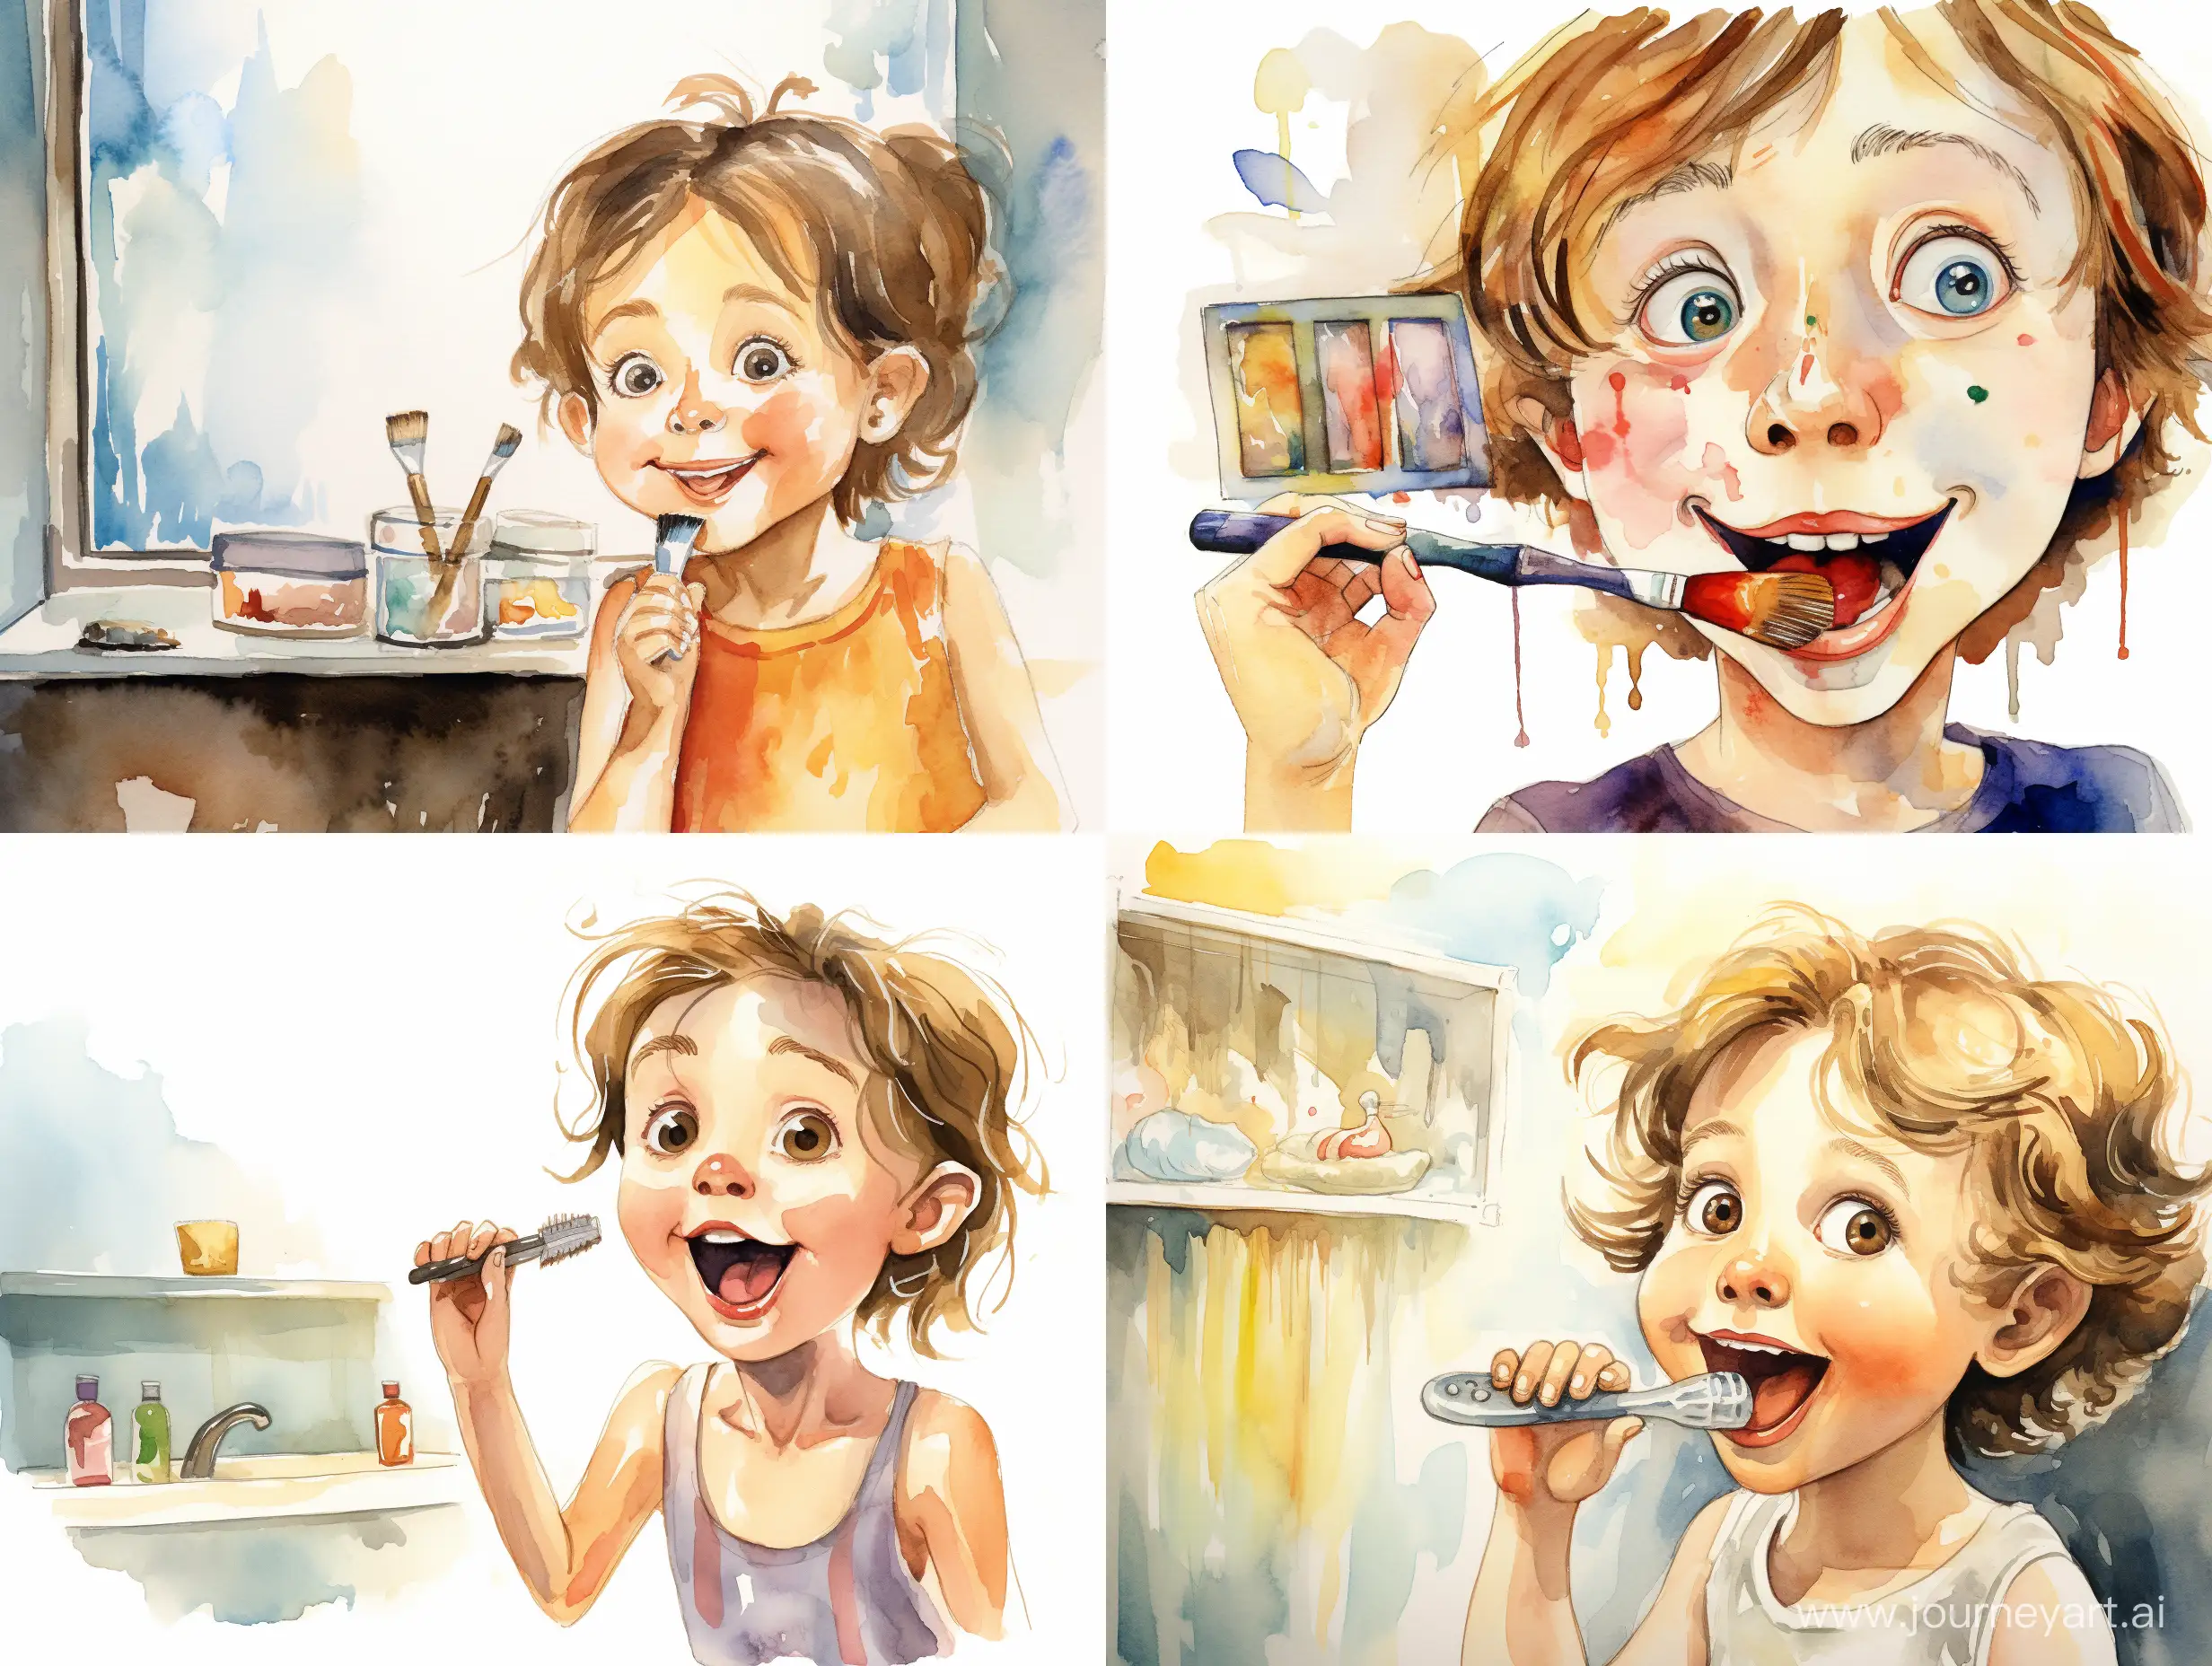 A three-year-old girl, light brown hair above her shoulders, with brown eyes, long eyelashes, small mouth, thin lips, brushing her teeth while looking in the mirror, stylized caricature, decorative, flat illustration, on a white background, watercolor, ink, Victor Ngai style, bright colors